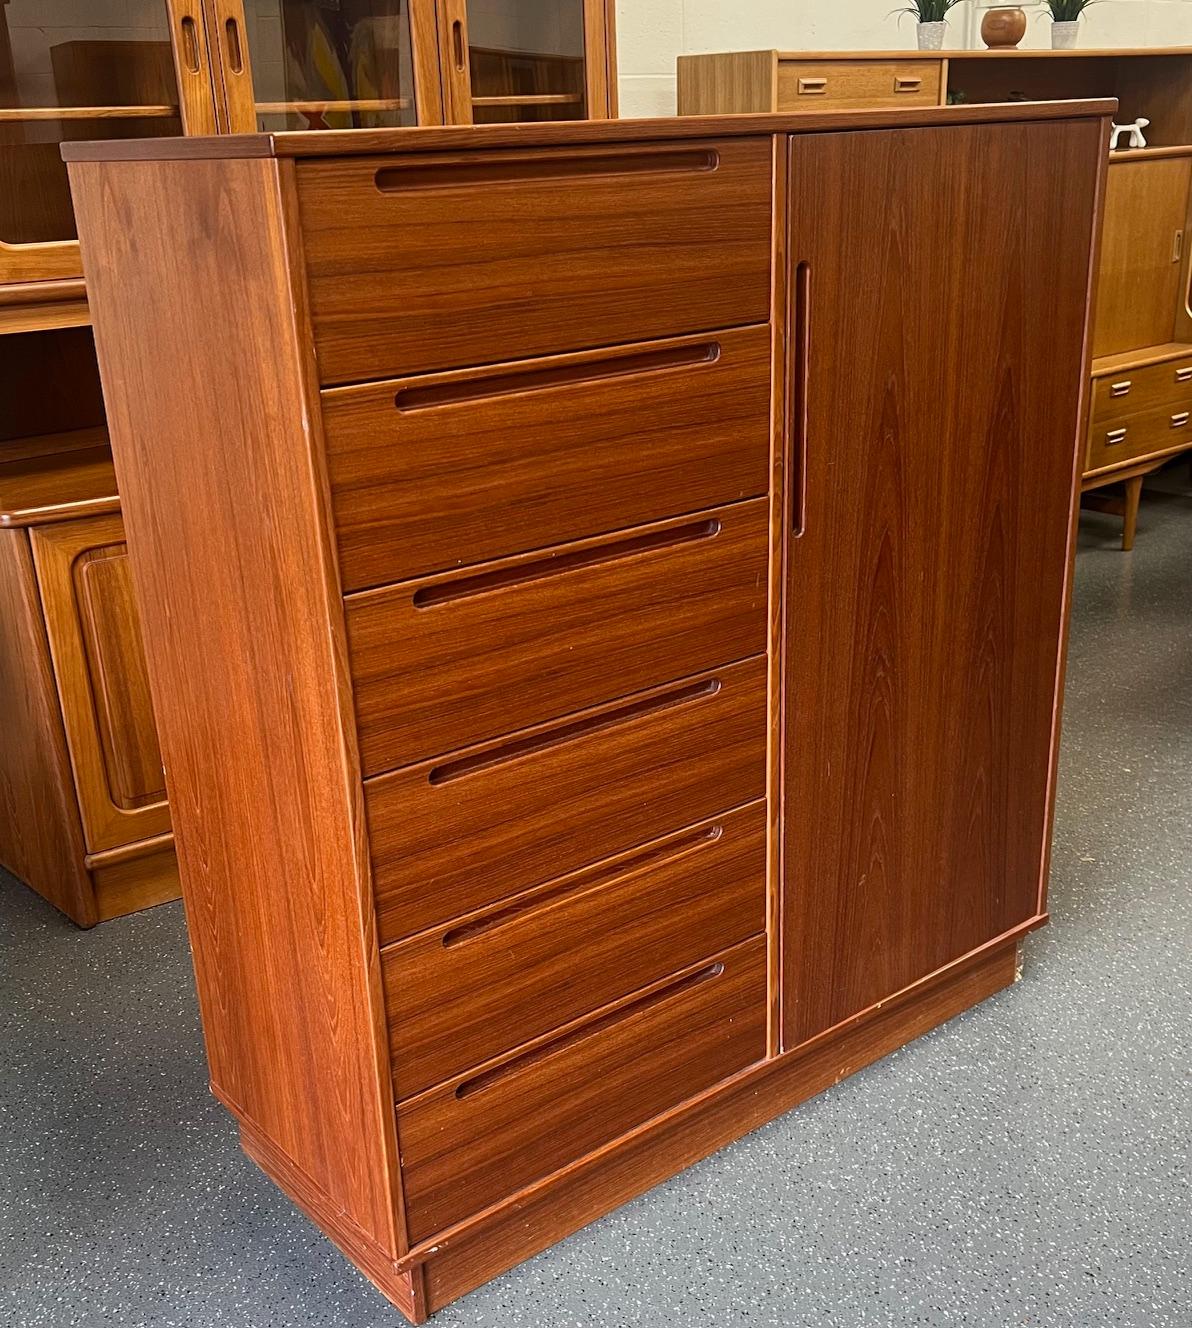 Danish teak veneer gentleman’s chest. Lots of storage with divided drawers on the right and 6 large drawers on the left.

Excellent condition overall. A little chipping on the left side and right side bottom. Also a small piece of veneer missing on